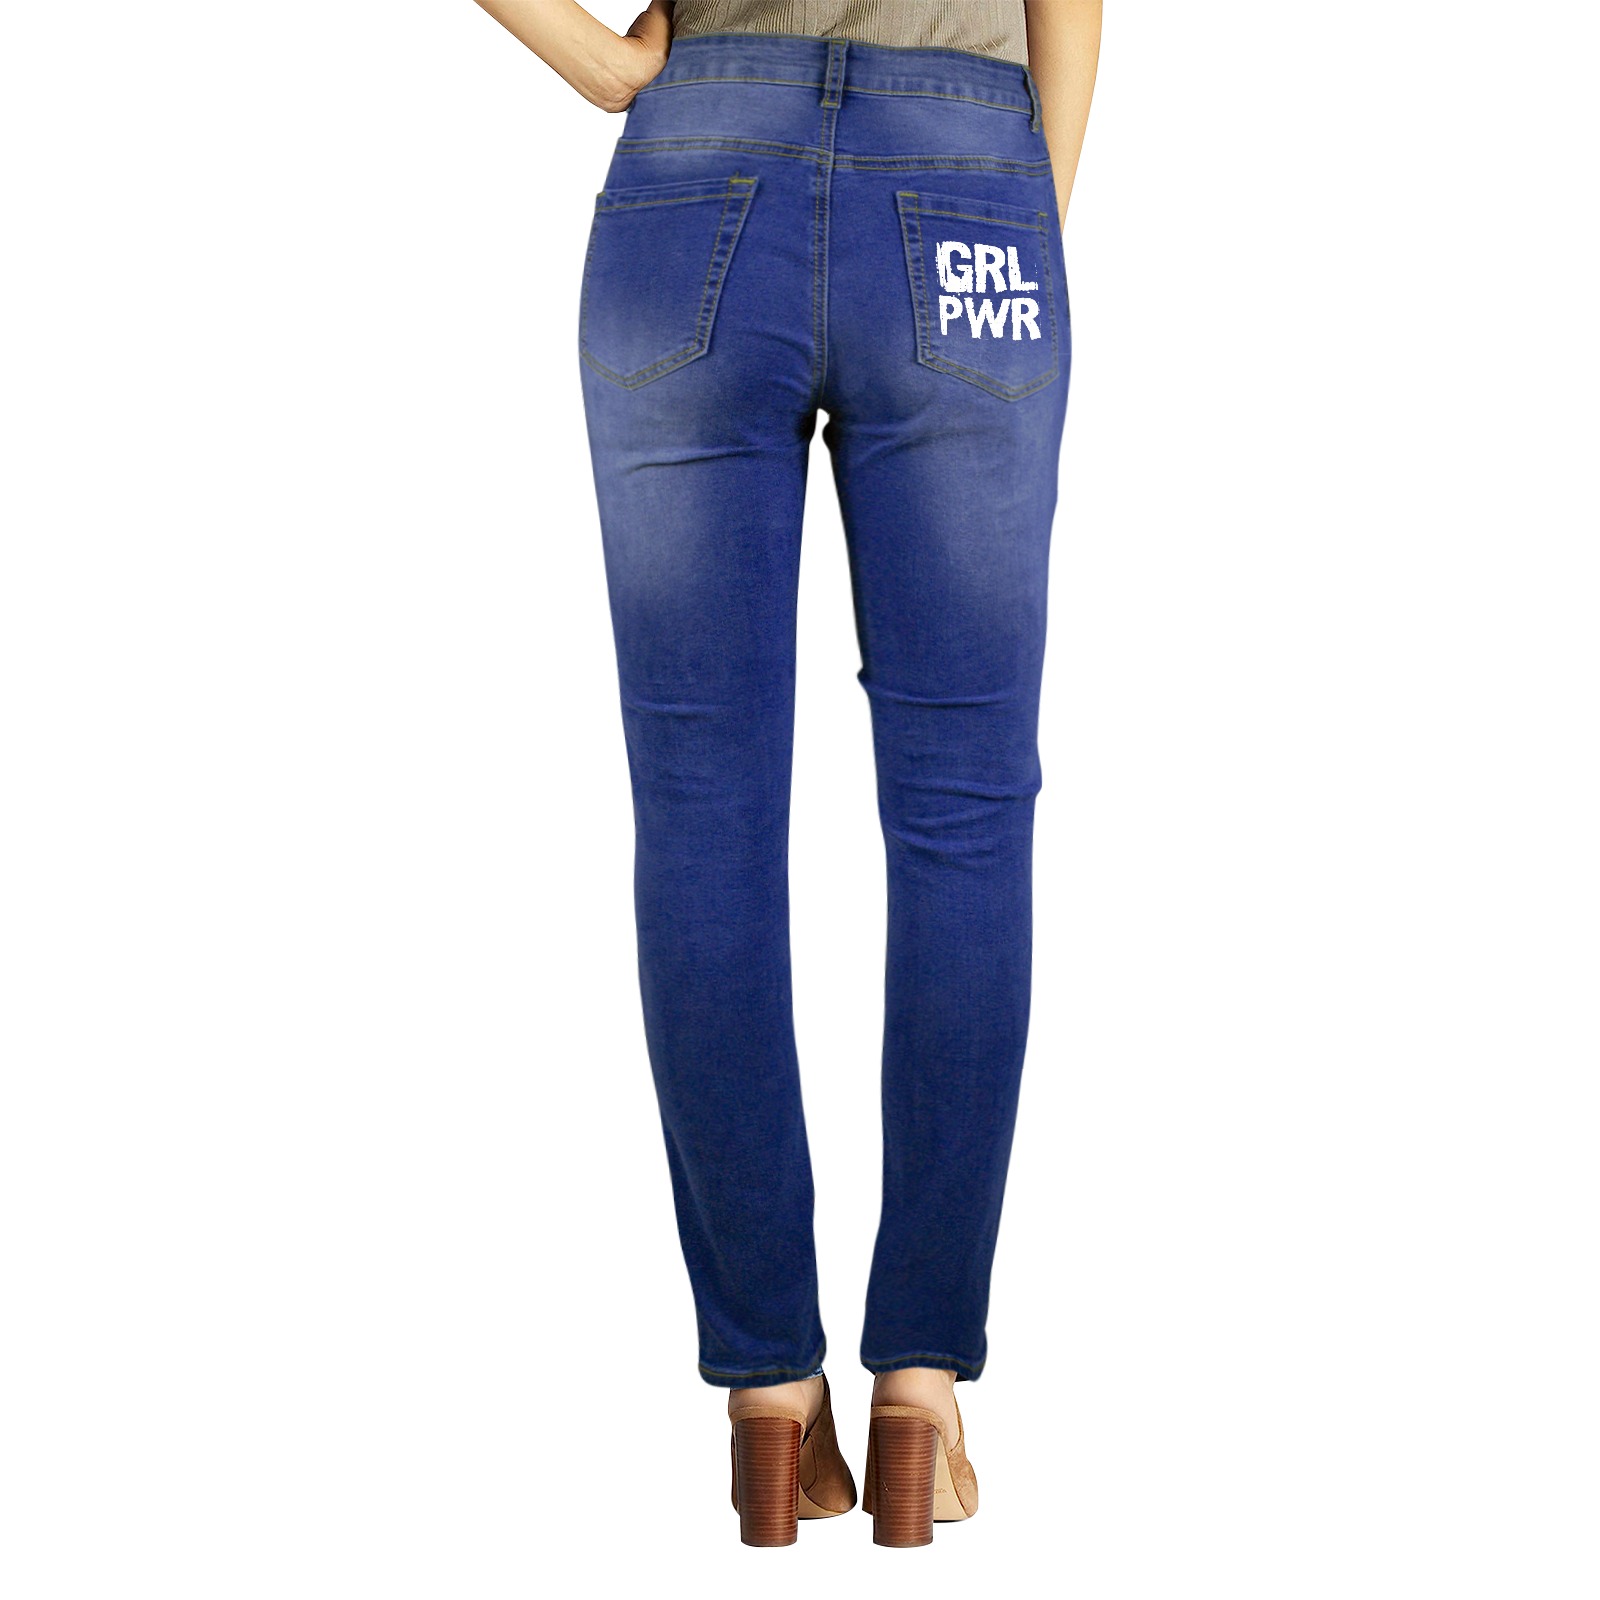 GRL PWR - Girl Power stunning white text. Women's Jeans (Front&Back Printing)